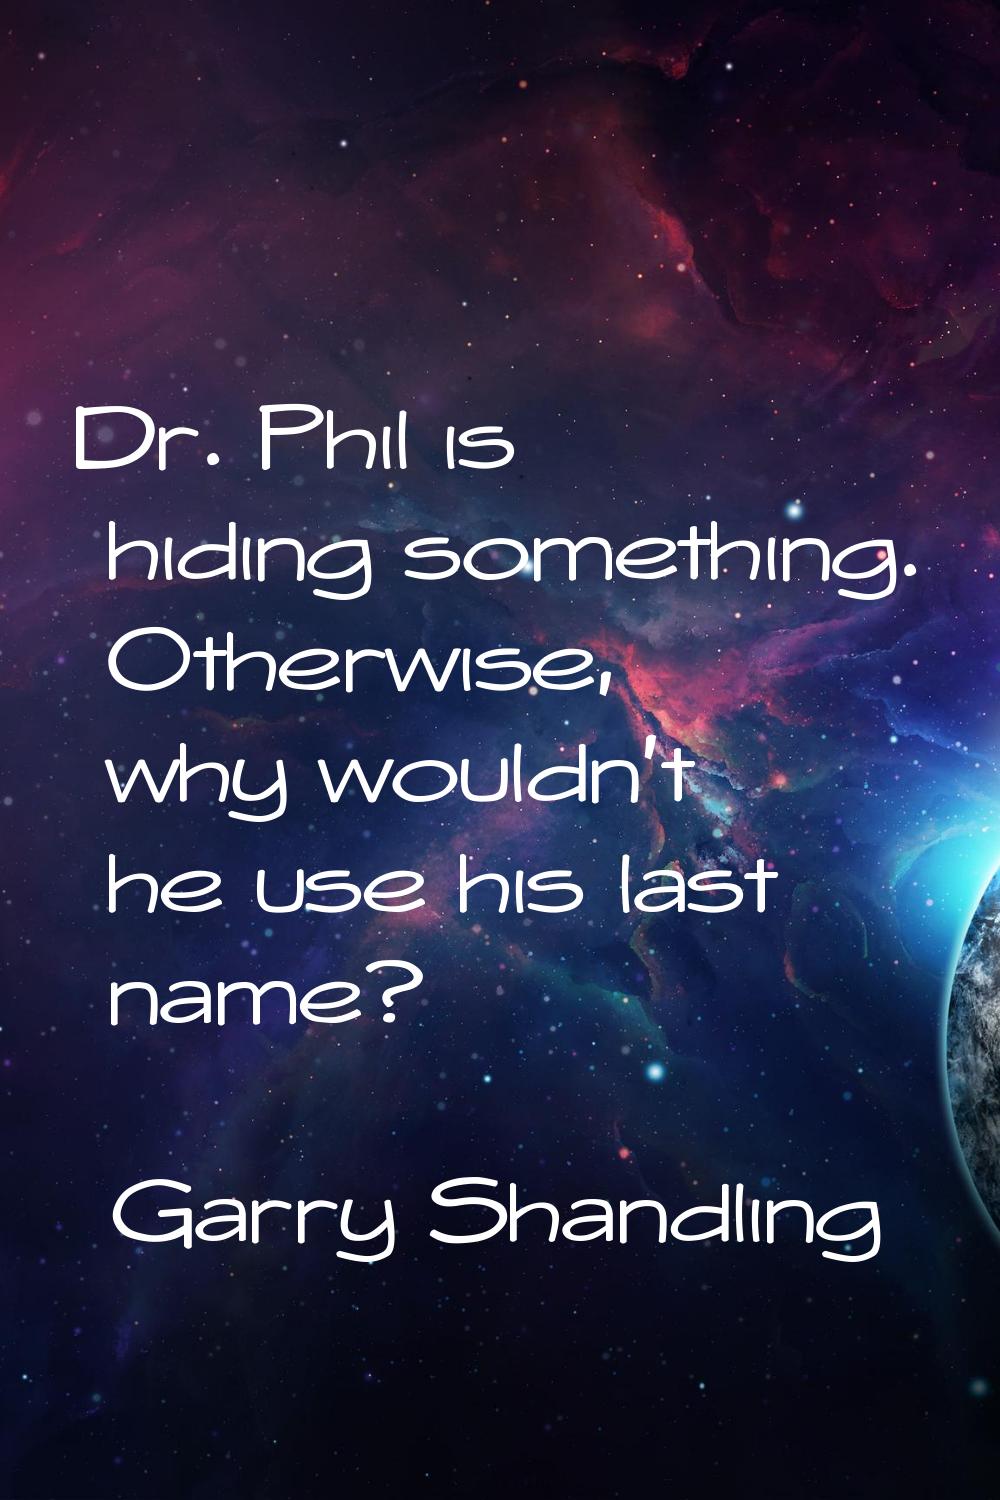 Dr. Phil is hiding something. Otherwise, why wouldn't he use his last name?